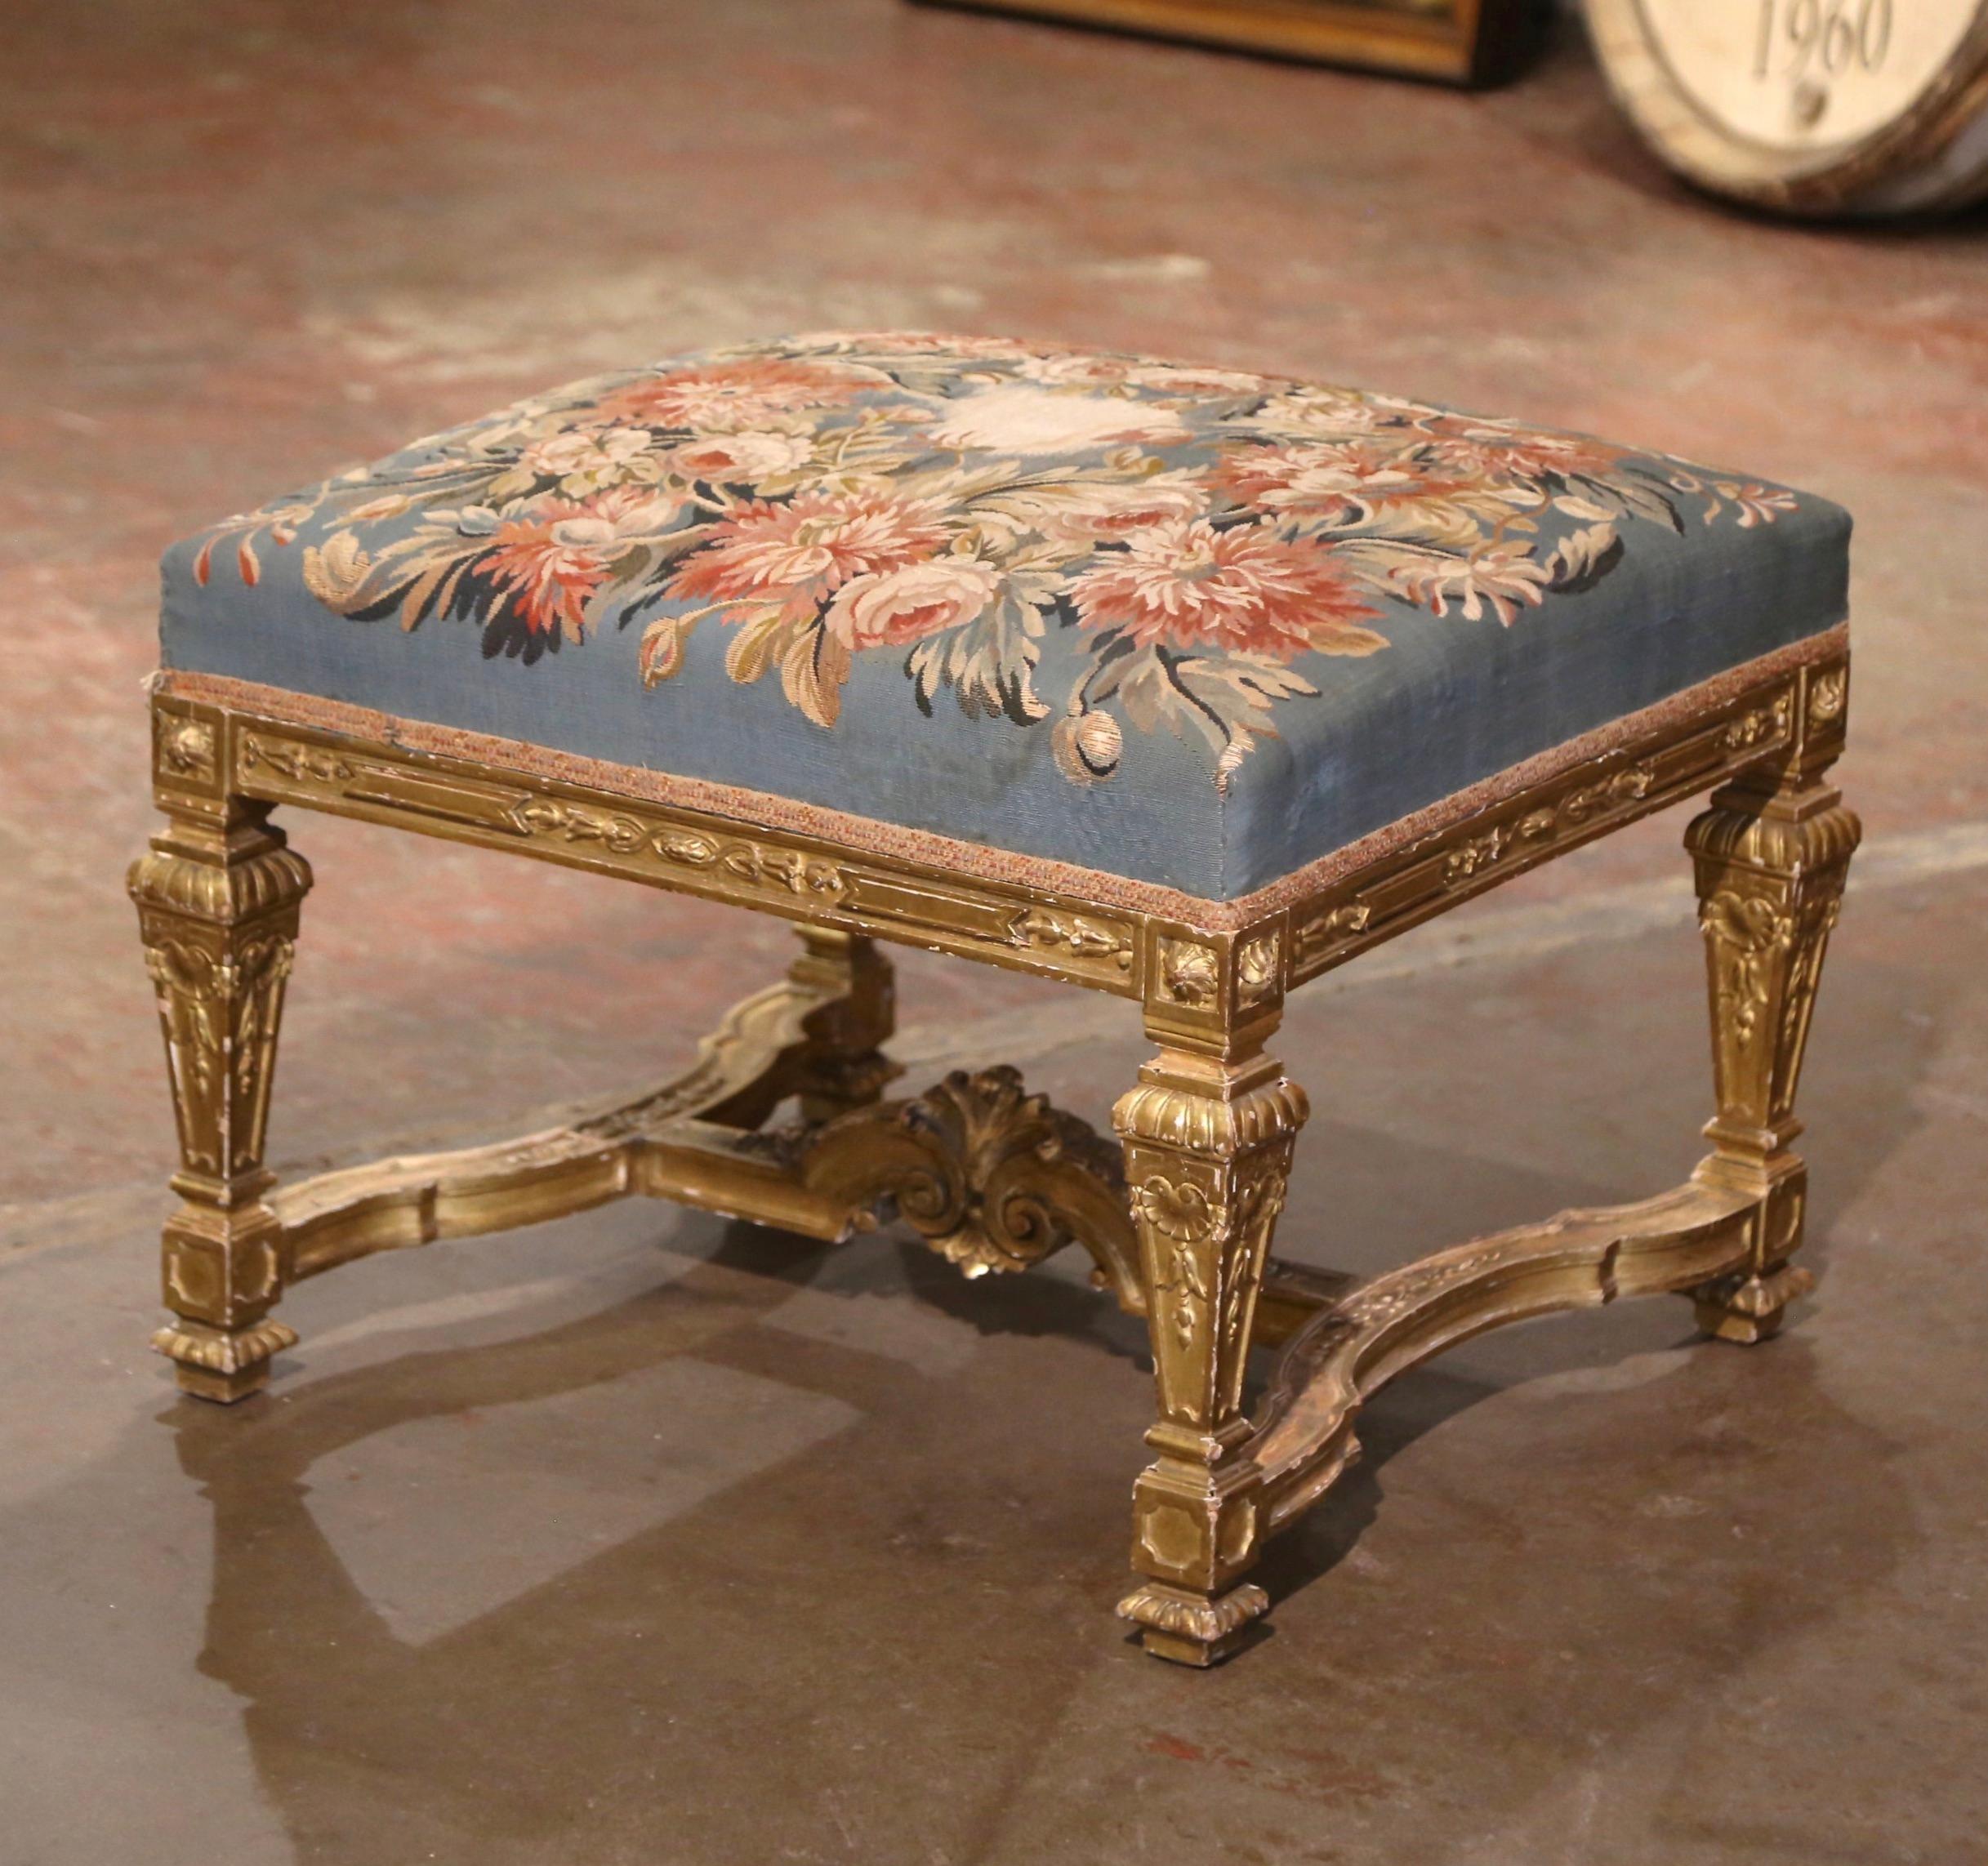 19th Century French Louis XIV Carved Giltwood Stool with Aubusson Tapestry In Excellent Condition For Sale In Dallas, TX